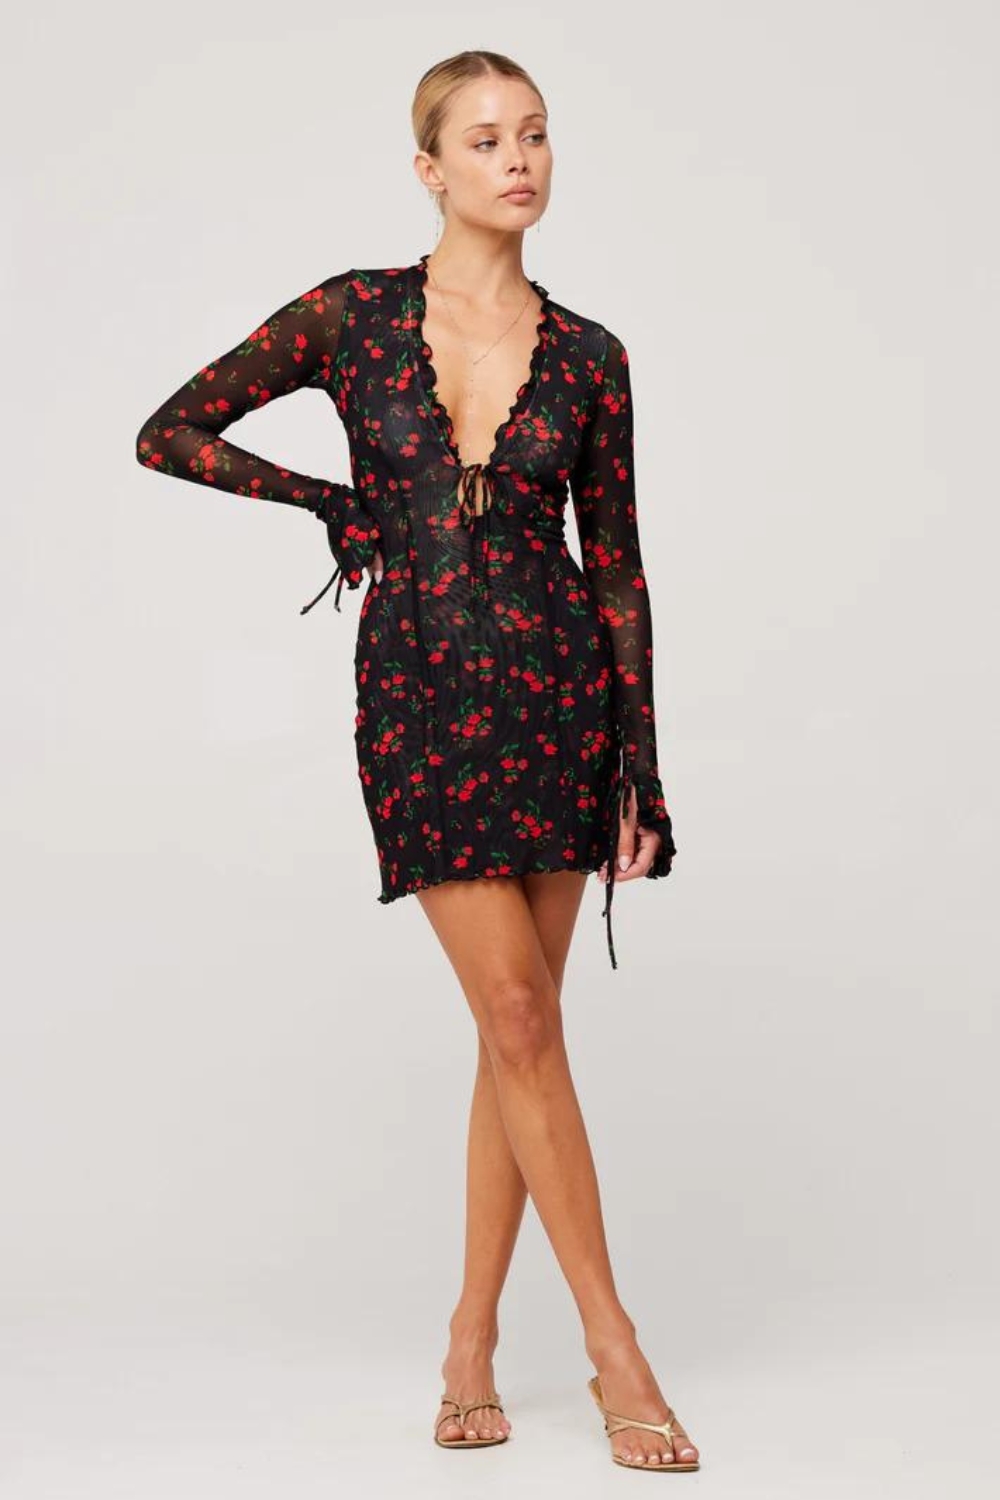 Music Festival Outfit - Plunging Neckline Dress